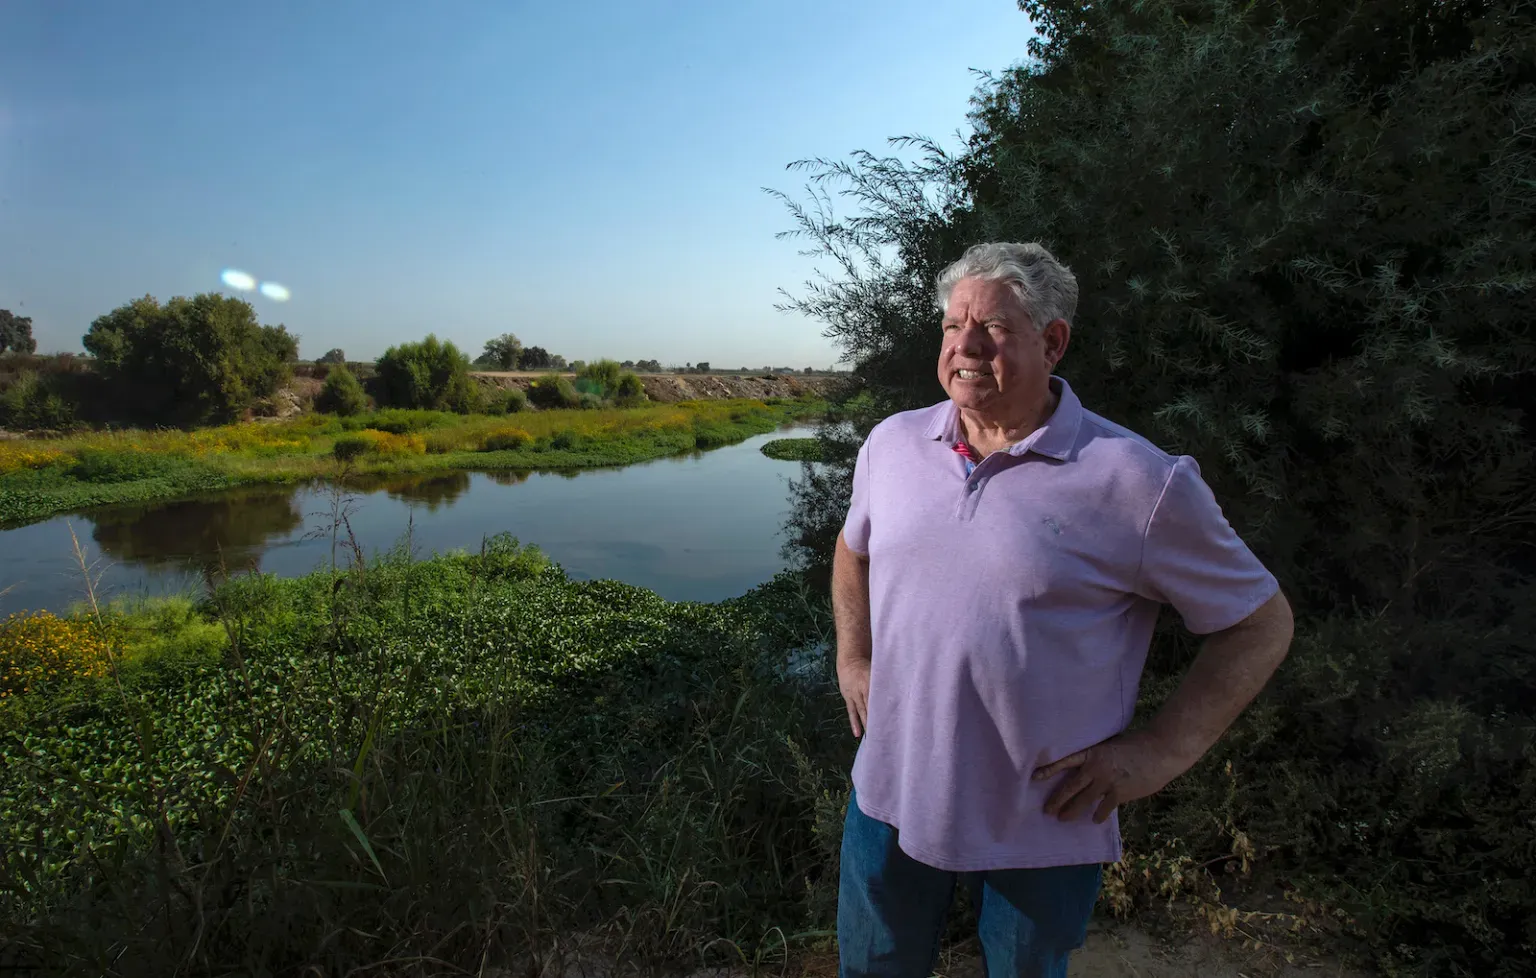 How can California solve its water woes? By flooding its best farmland